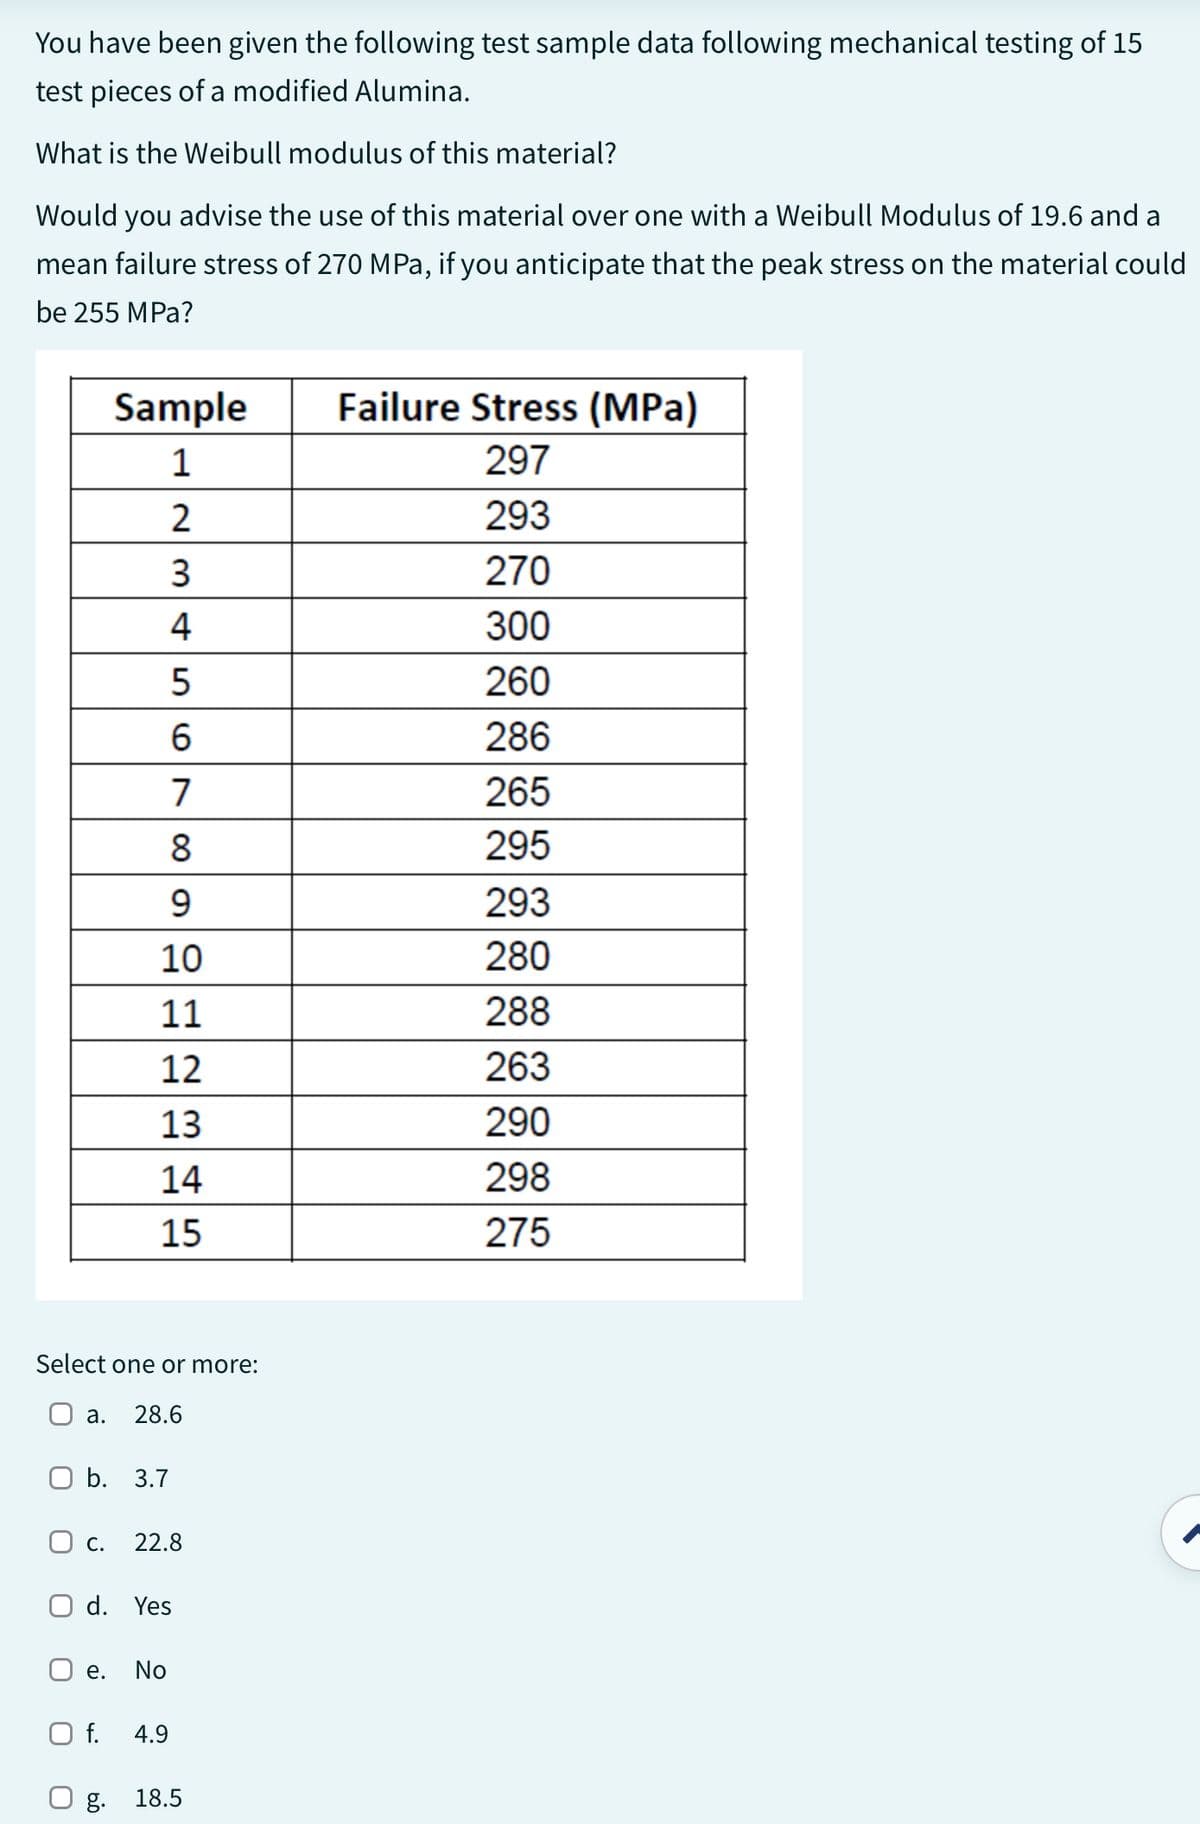 You have been given the following test sample data following mechanical testing of 15
test pieces of a modified Alumina.
What is the Weibull modulus of this material?
Would you advise the use of this material over one with a Weibull Modulus of 19.6 and a
mean failure stress of 270 MPa, if you anticipate that the peak stress on the material could
be 255 MPa?
Select one or more:
a. 28.6
b. 3.7
О с.
Sample
1
2
3
4
5
6
7
8
9
10
11
12
13
14
15
e.
d. Yes
22.8
g.
No
O f. 4.9
18.5
Failure Stress (MPa)
297
293
270
300
260
286
265
295
293
280
288
263
290
298
275